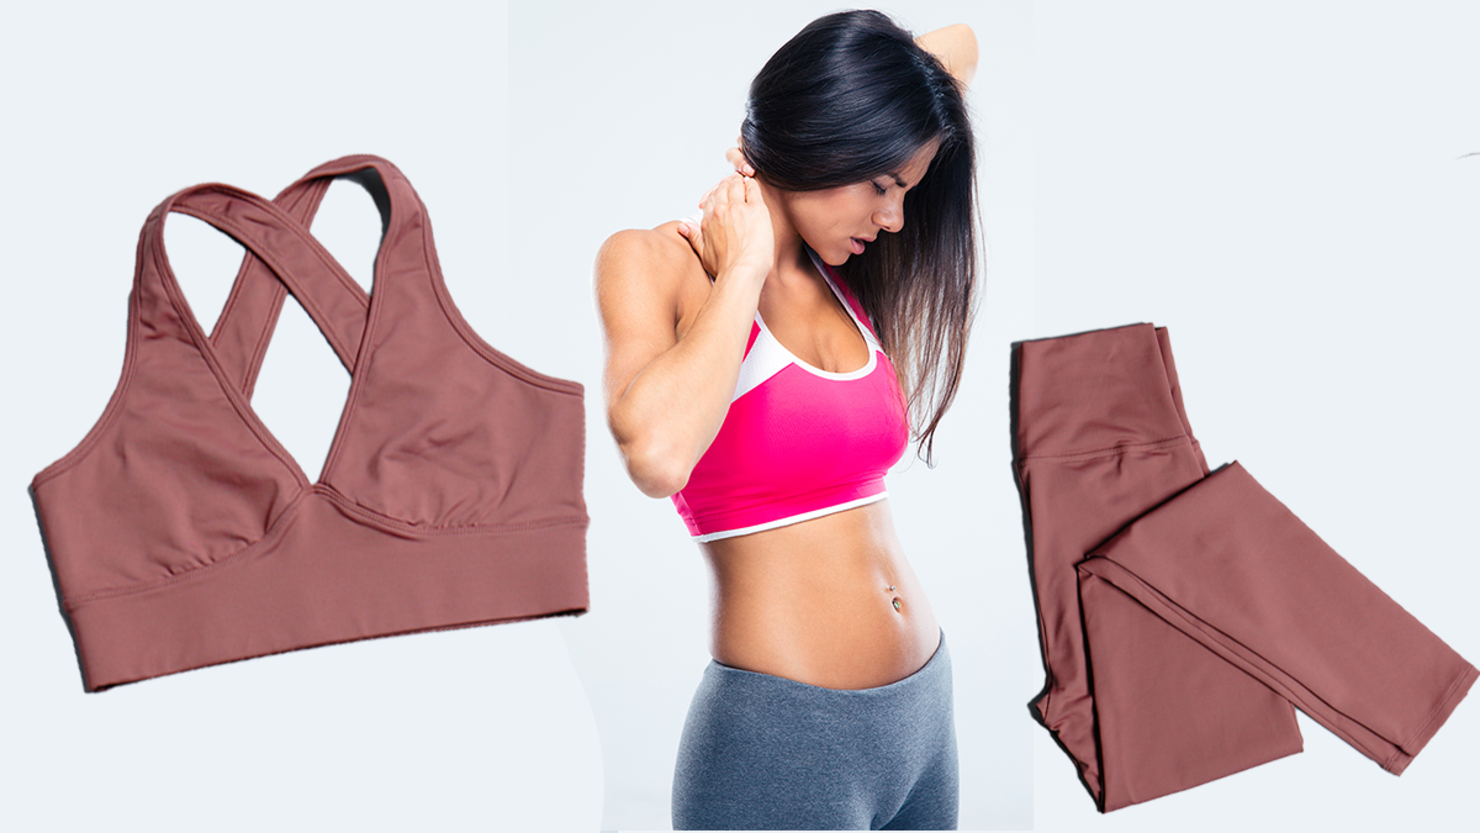 High levels of BPA found in name-brand sports bras, shirts